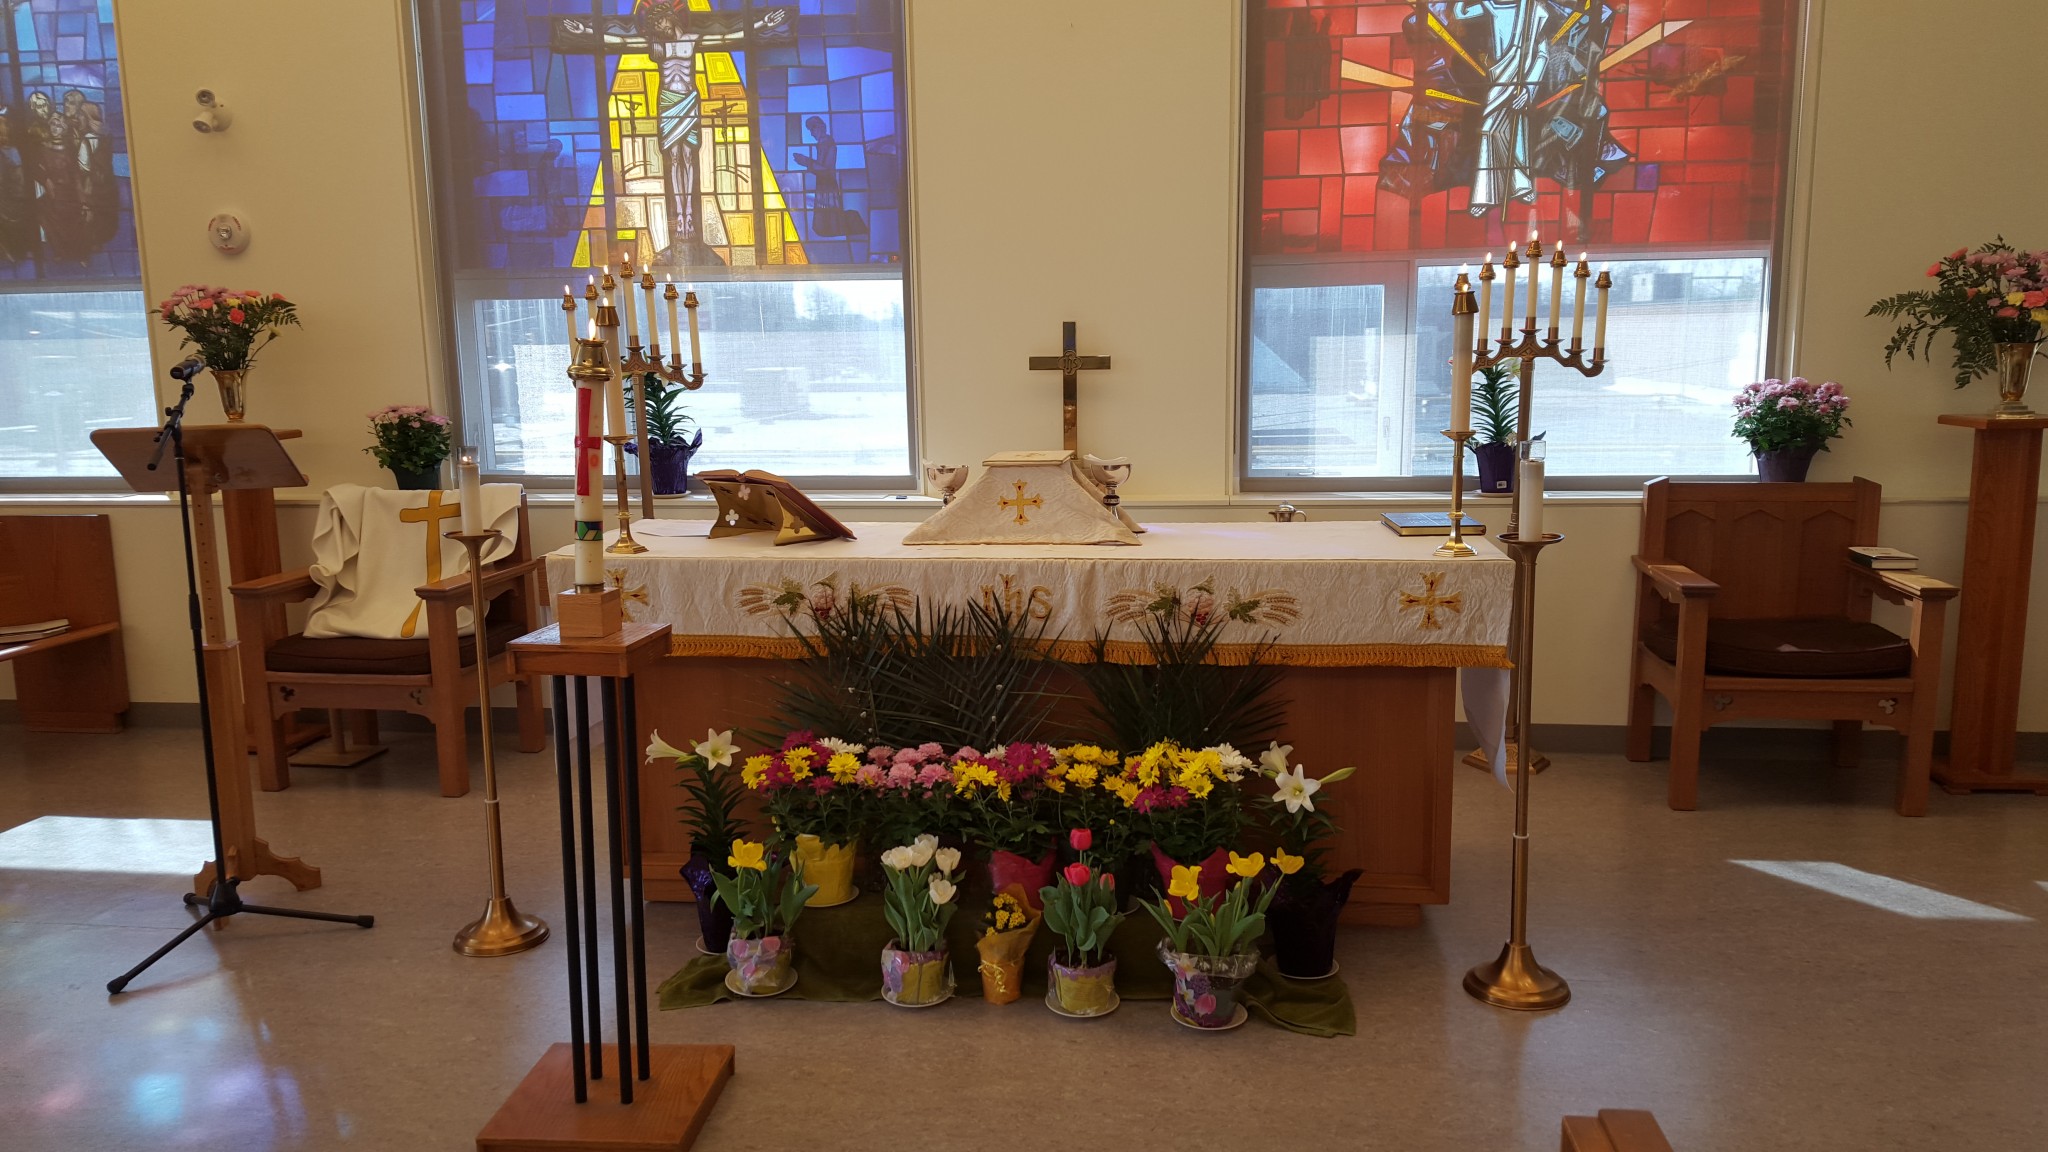 Holy Week & Easter Service Schedule